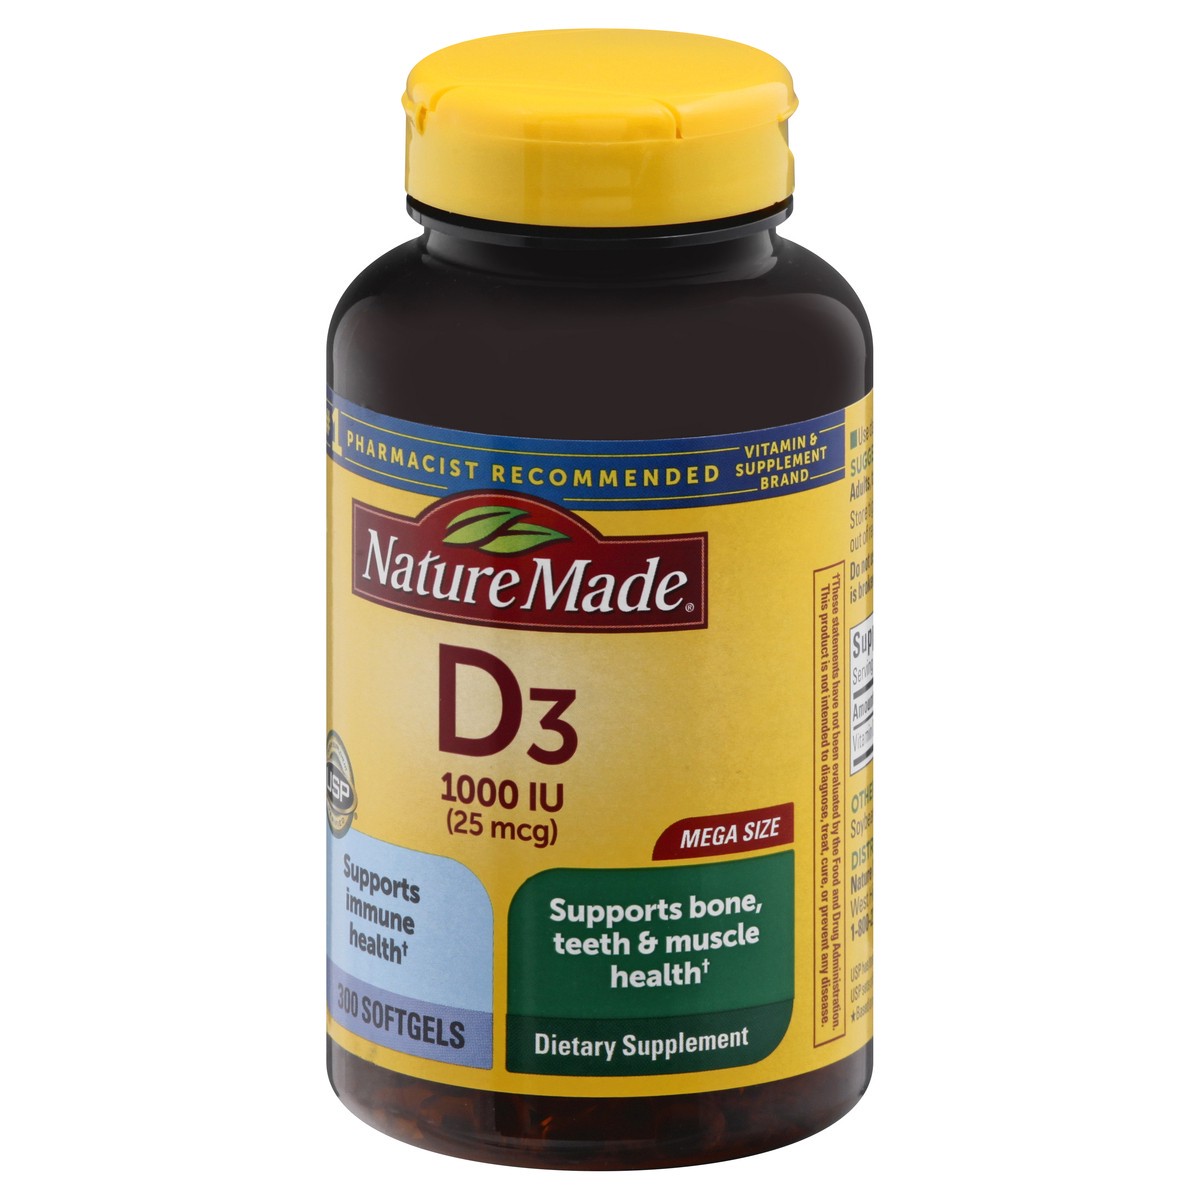 slide 11 of 12, Nature Made Vitamin D3 1000 IU (25 mcg), Dietary Supplement for Bone, Teeth, Muscle and Immune Health Support, 300 Softgels, 300 Day Supply, 300 ct